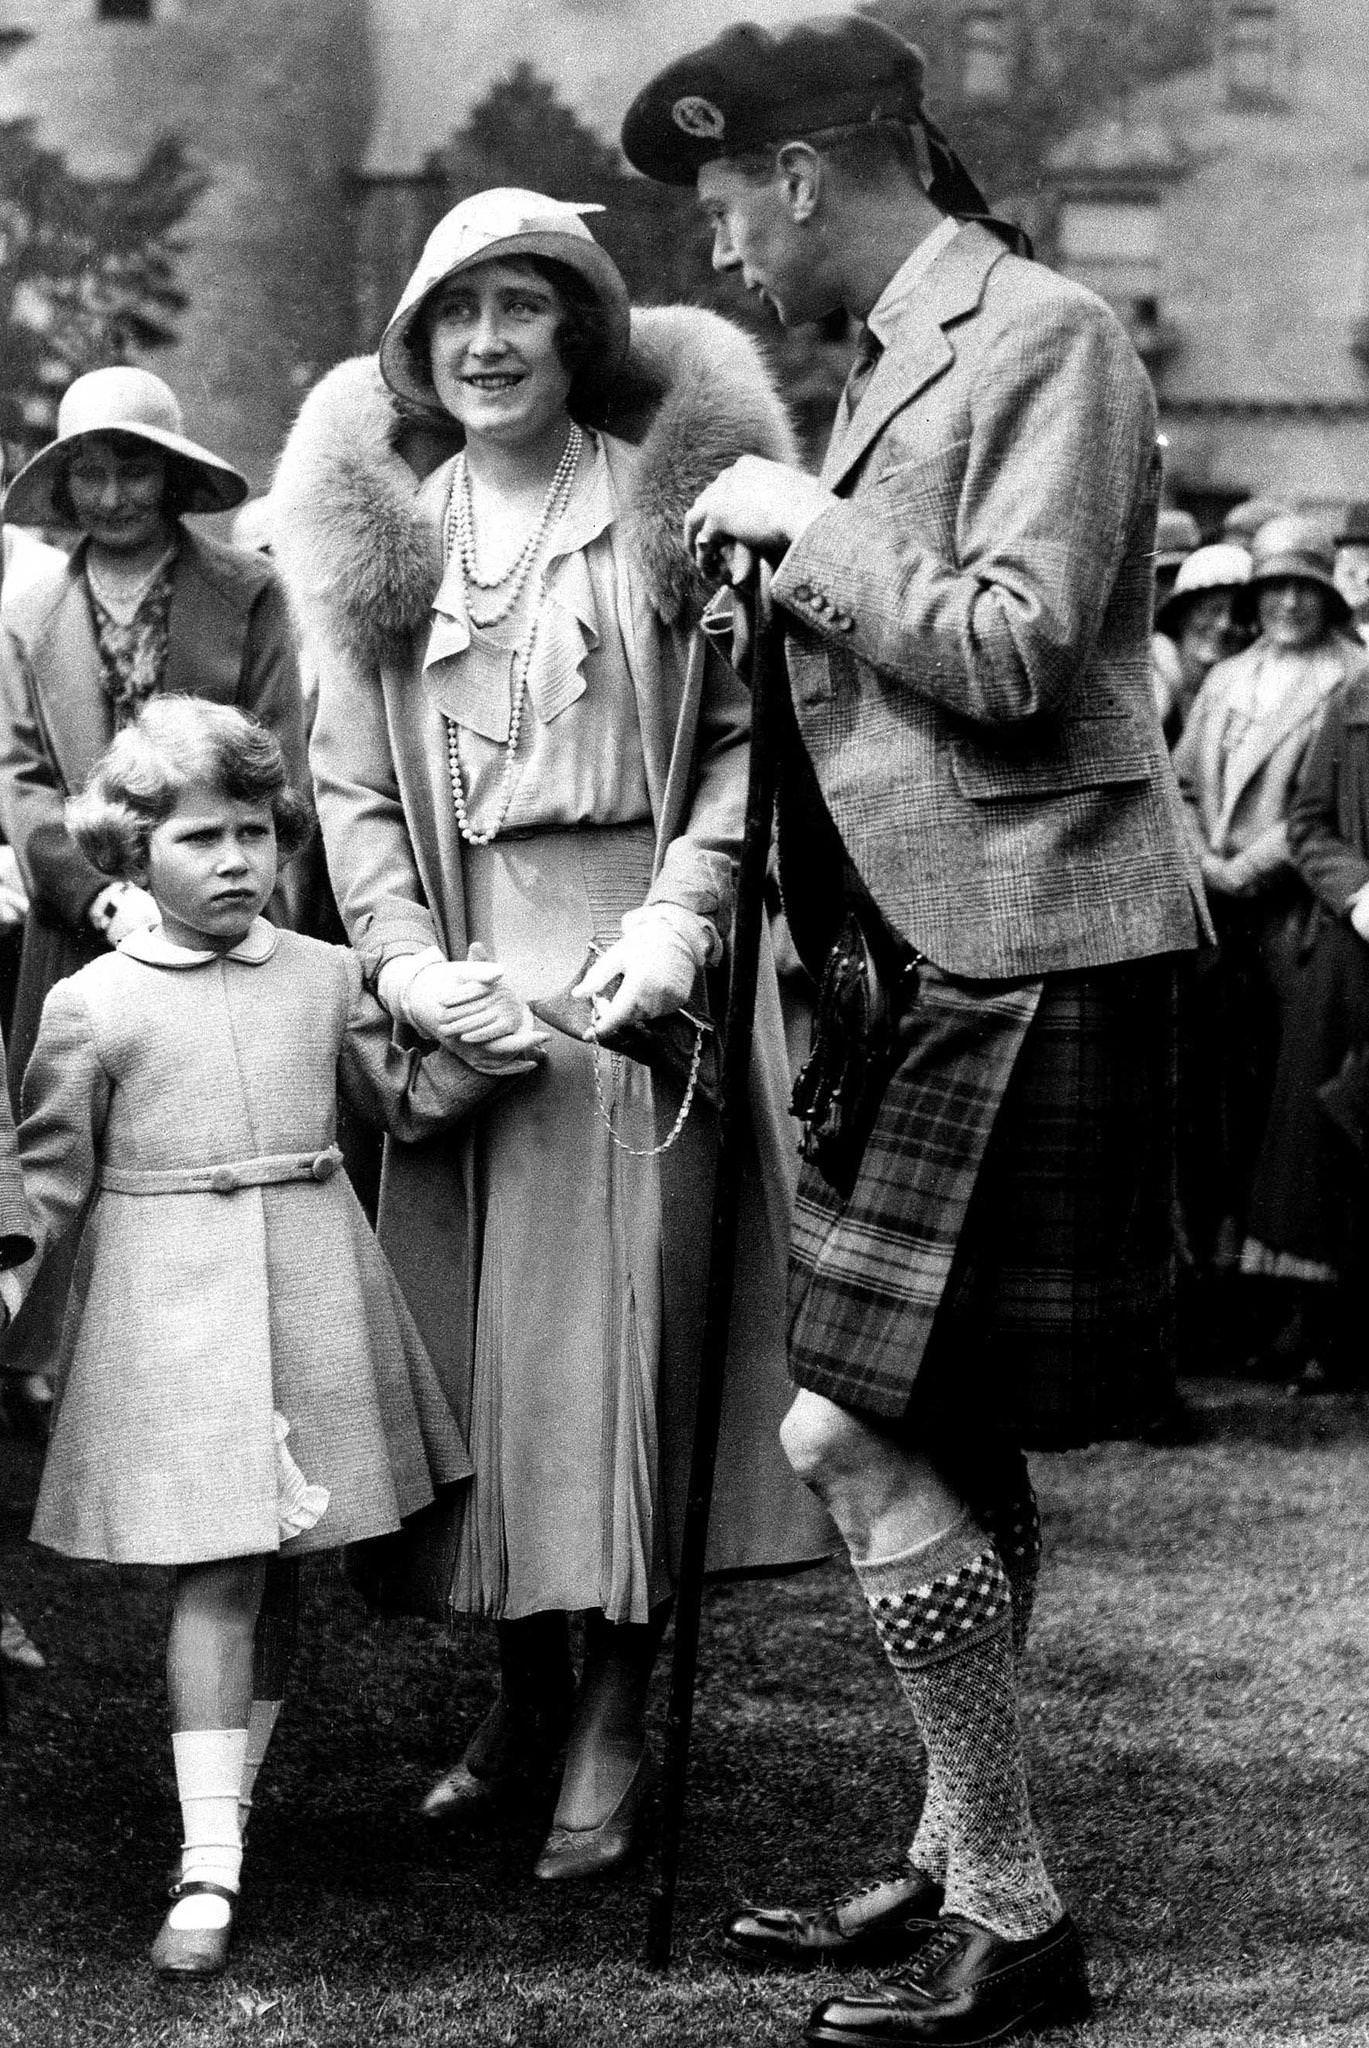 The Duke and Duchess of York (later King George VI and the Queen Mother) with their daughter Princess Elizabeth in Scotland on September 22, 1932.